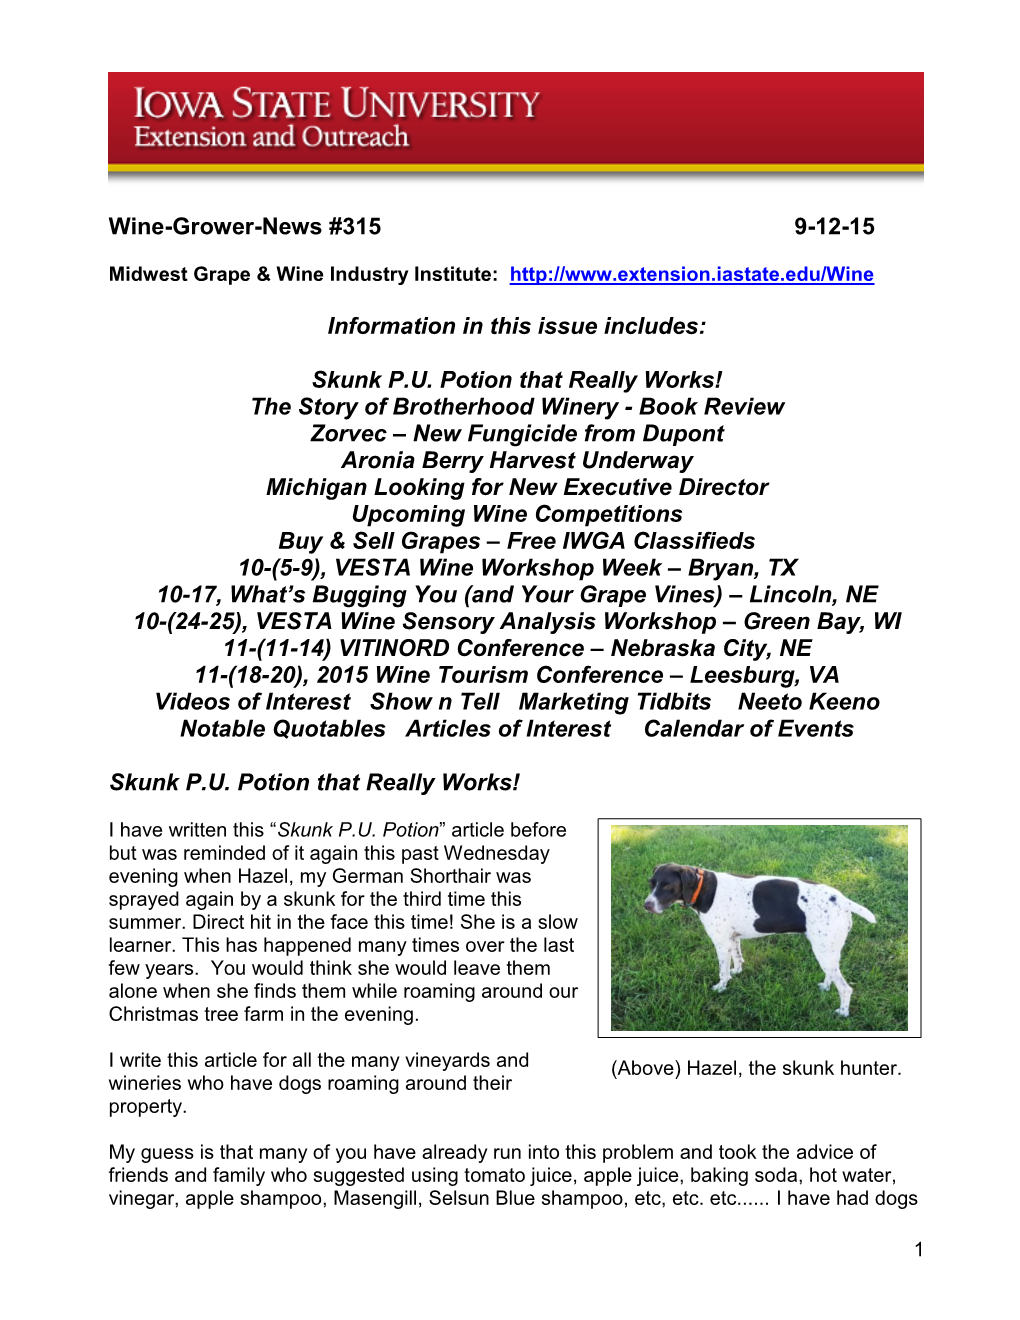 Wine-Grower-News #315 9-12-15 Information in This Issue Includes